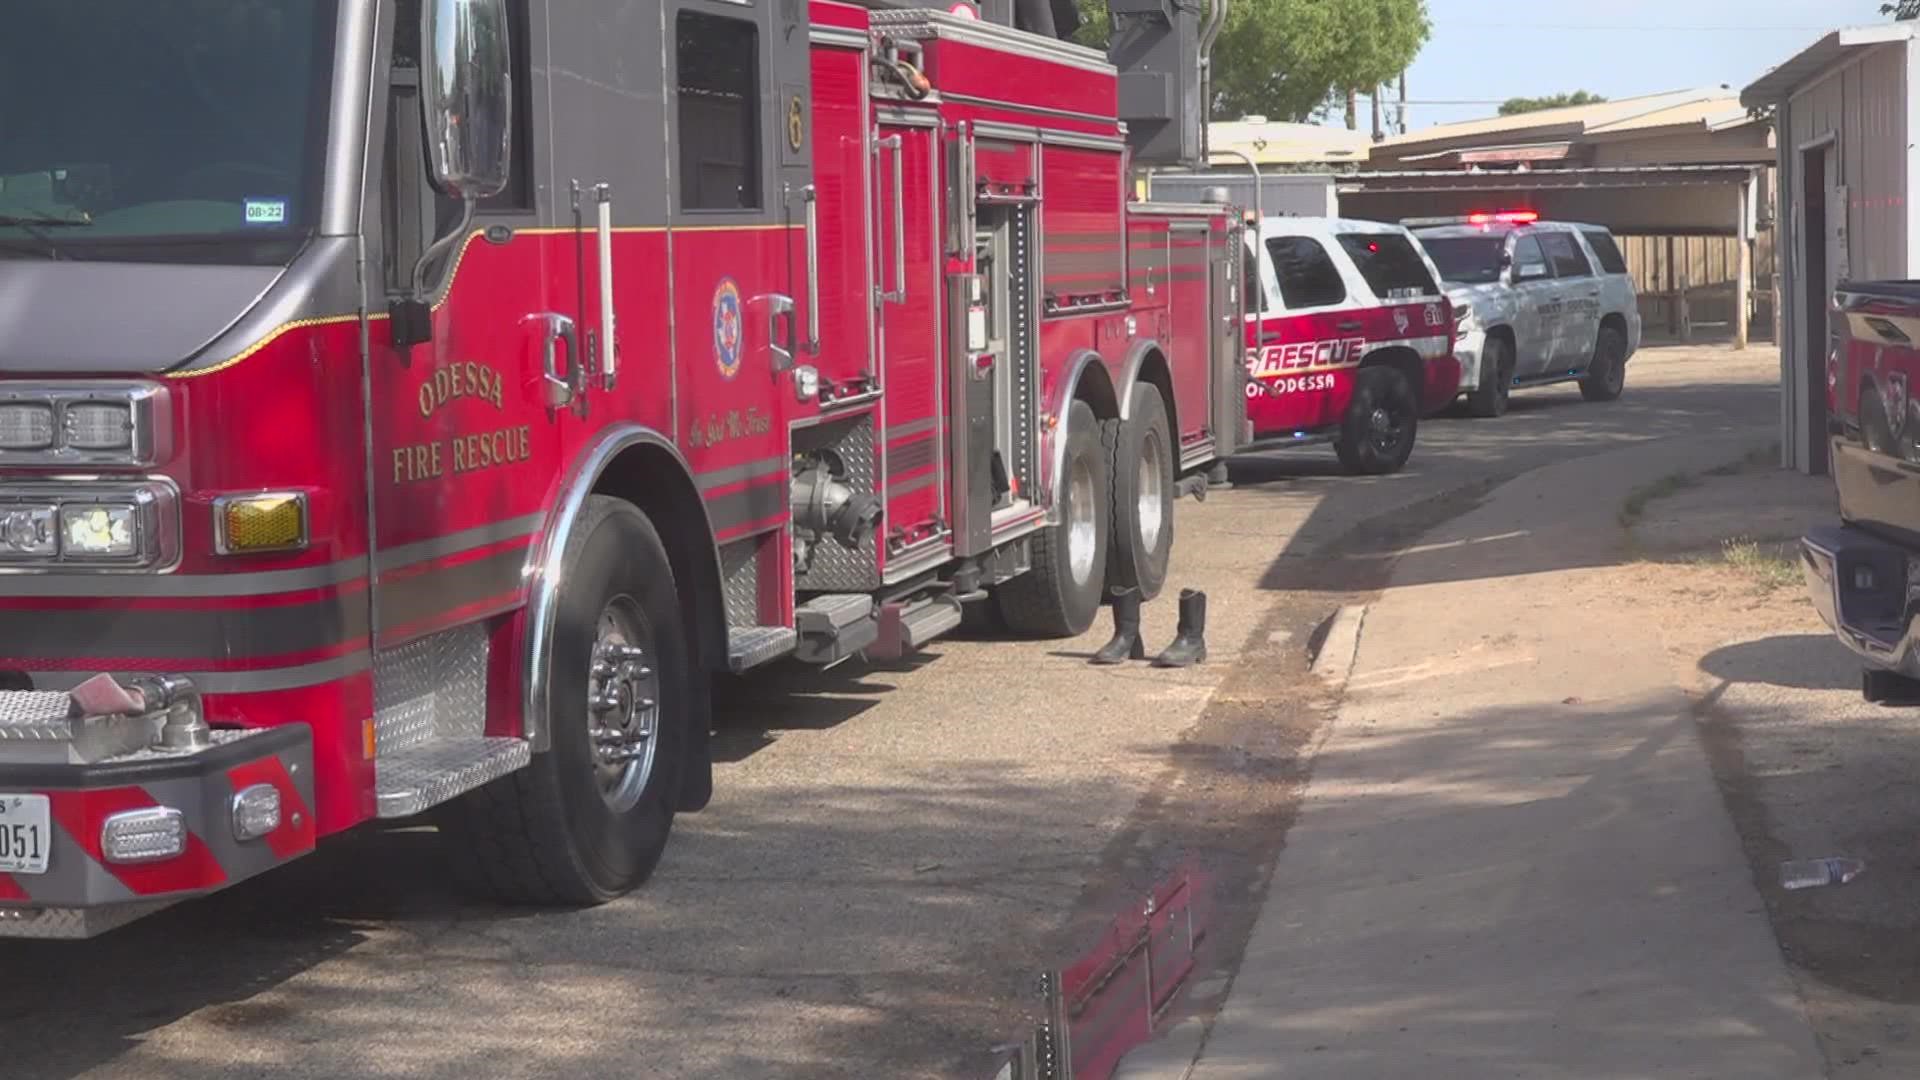 At 3:17 a.m. on August 13, the Ector County Sheriff's Office got a call about a fire starting at a home in the 1500 block of Bridle Path.